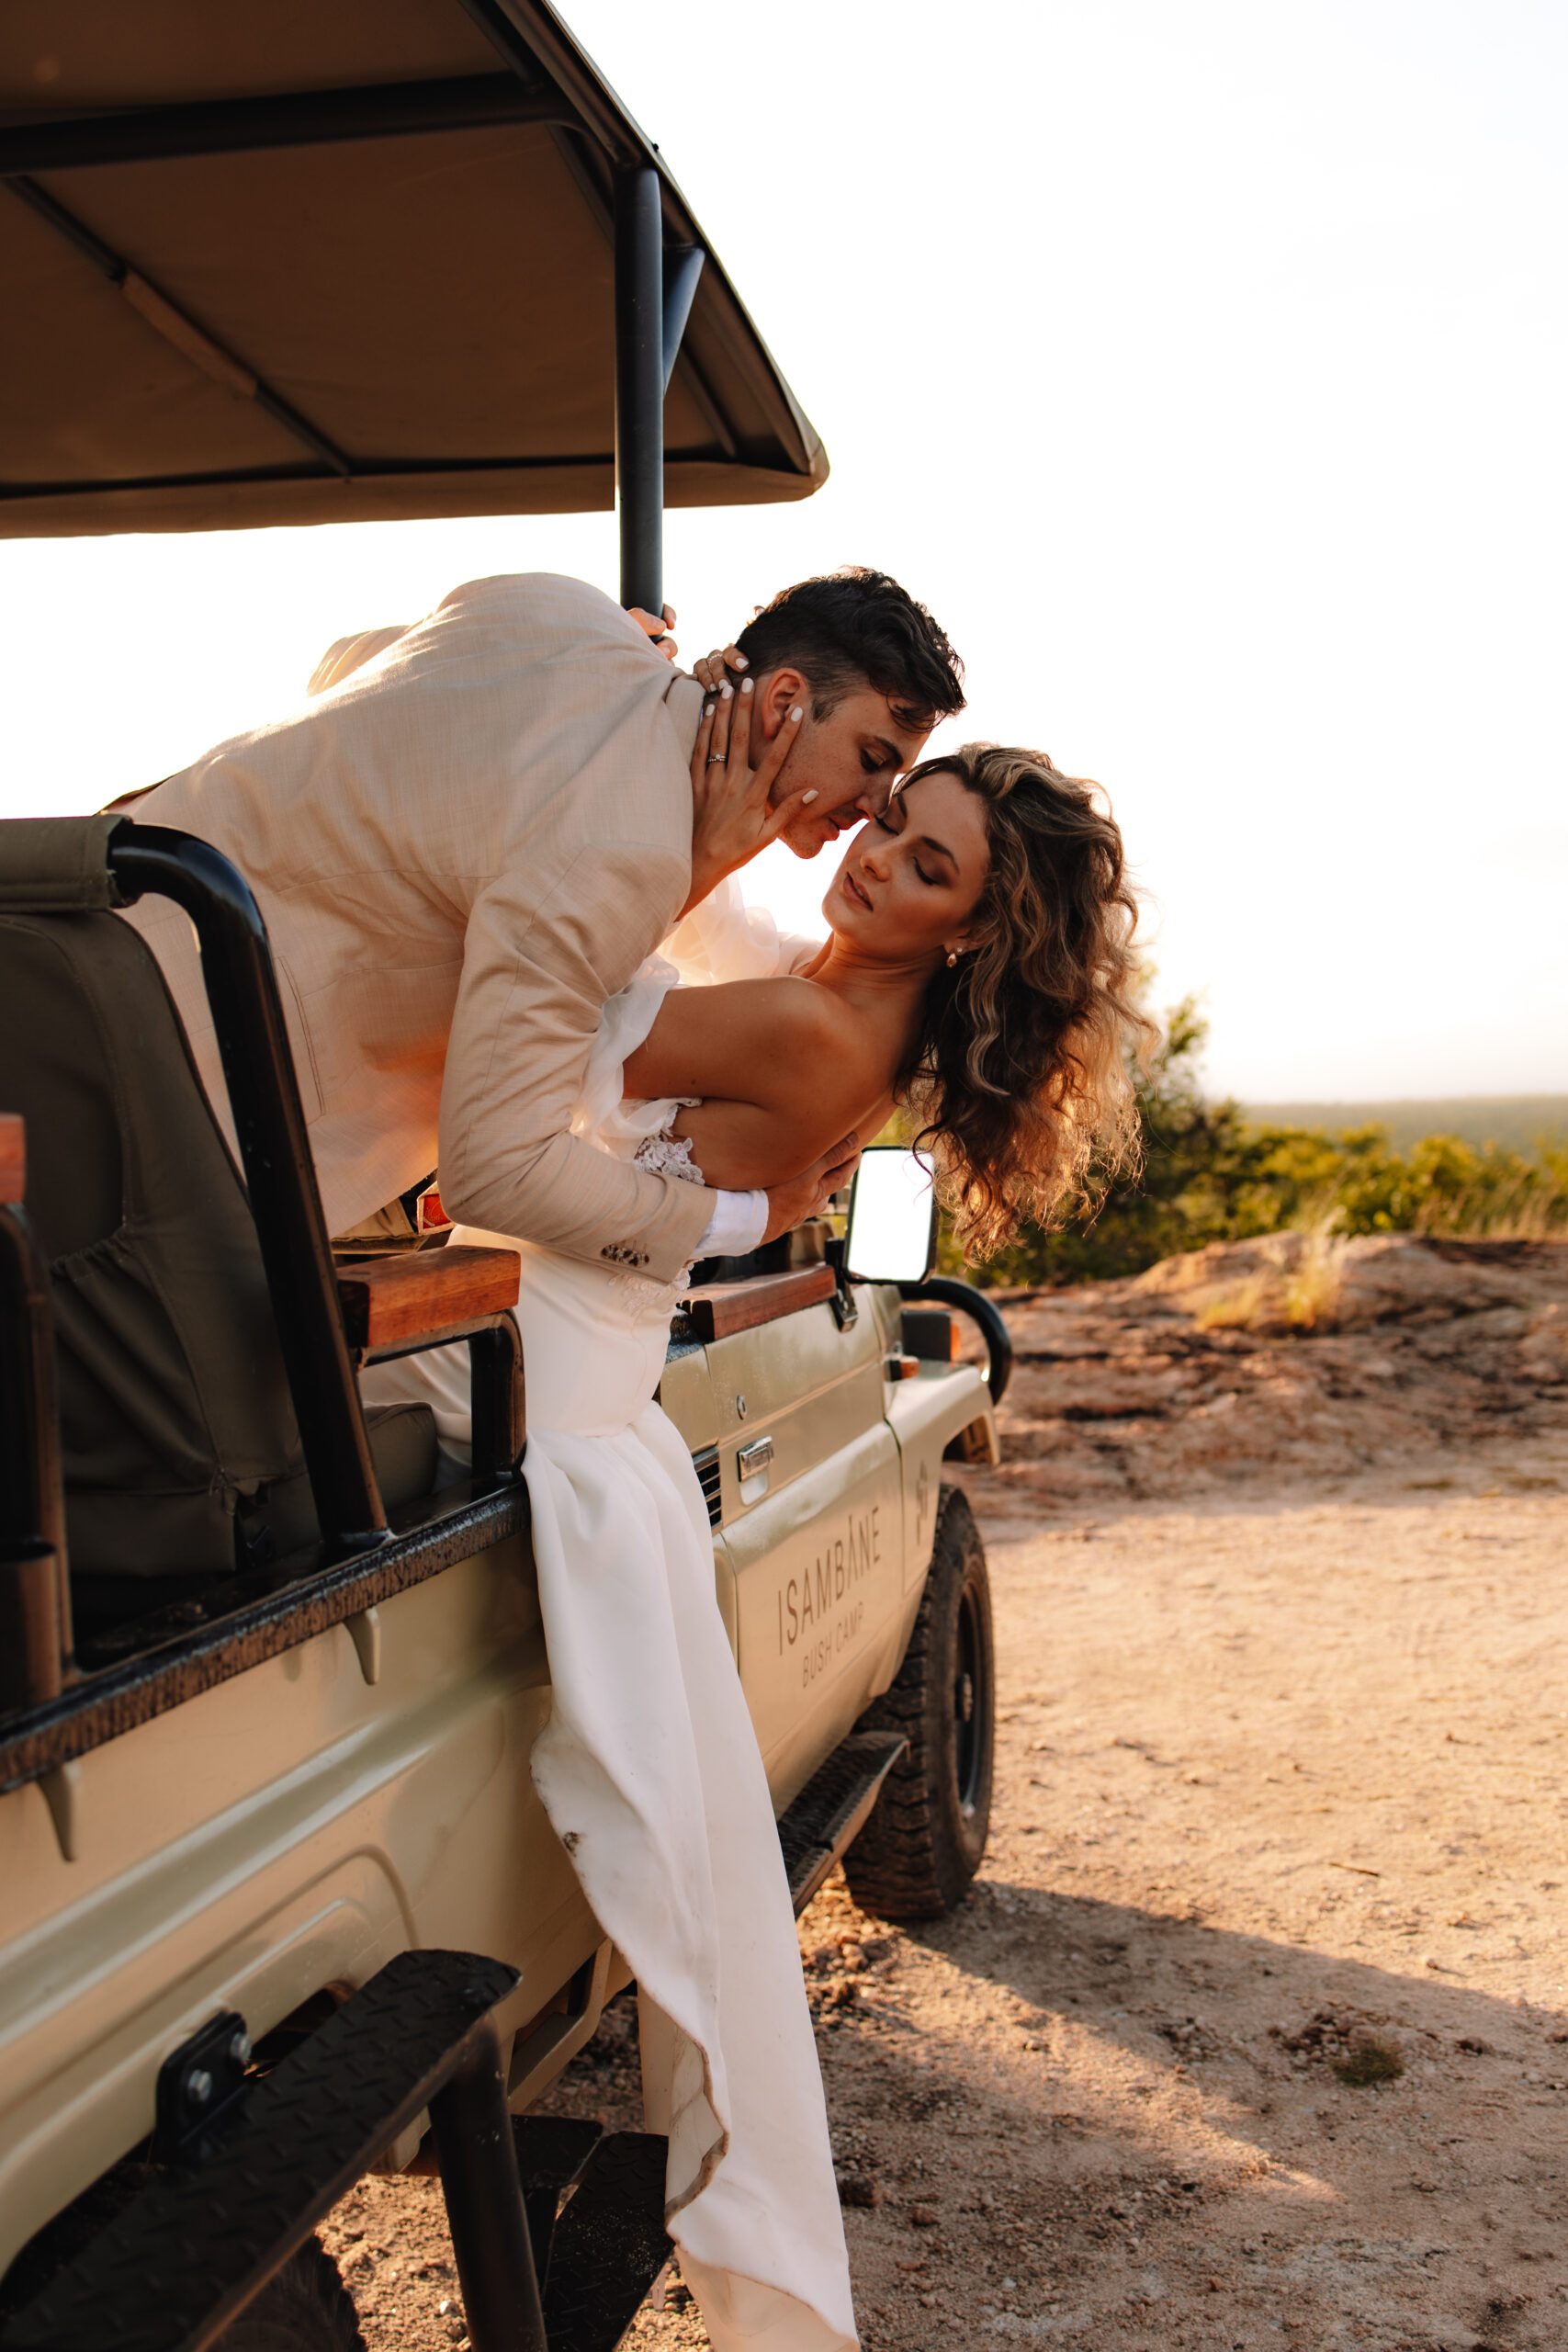 A bride and groom leaning out of the safari vehicle in South Africa with the Sun shining behind them